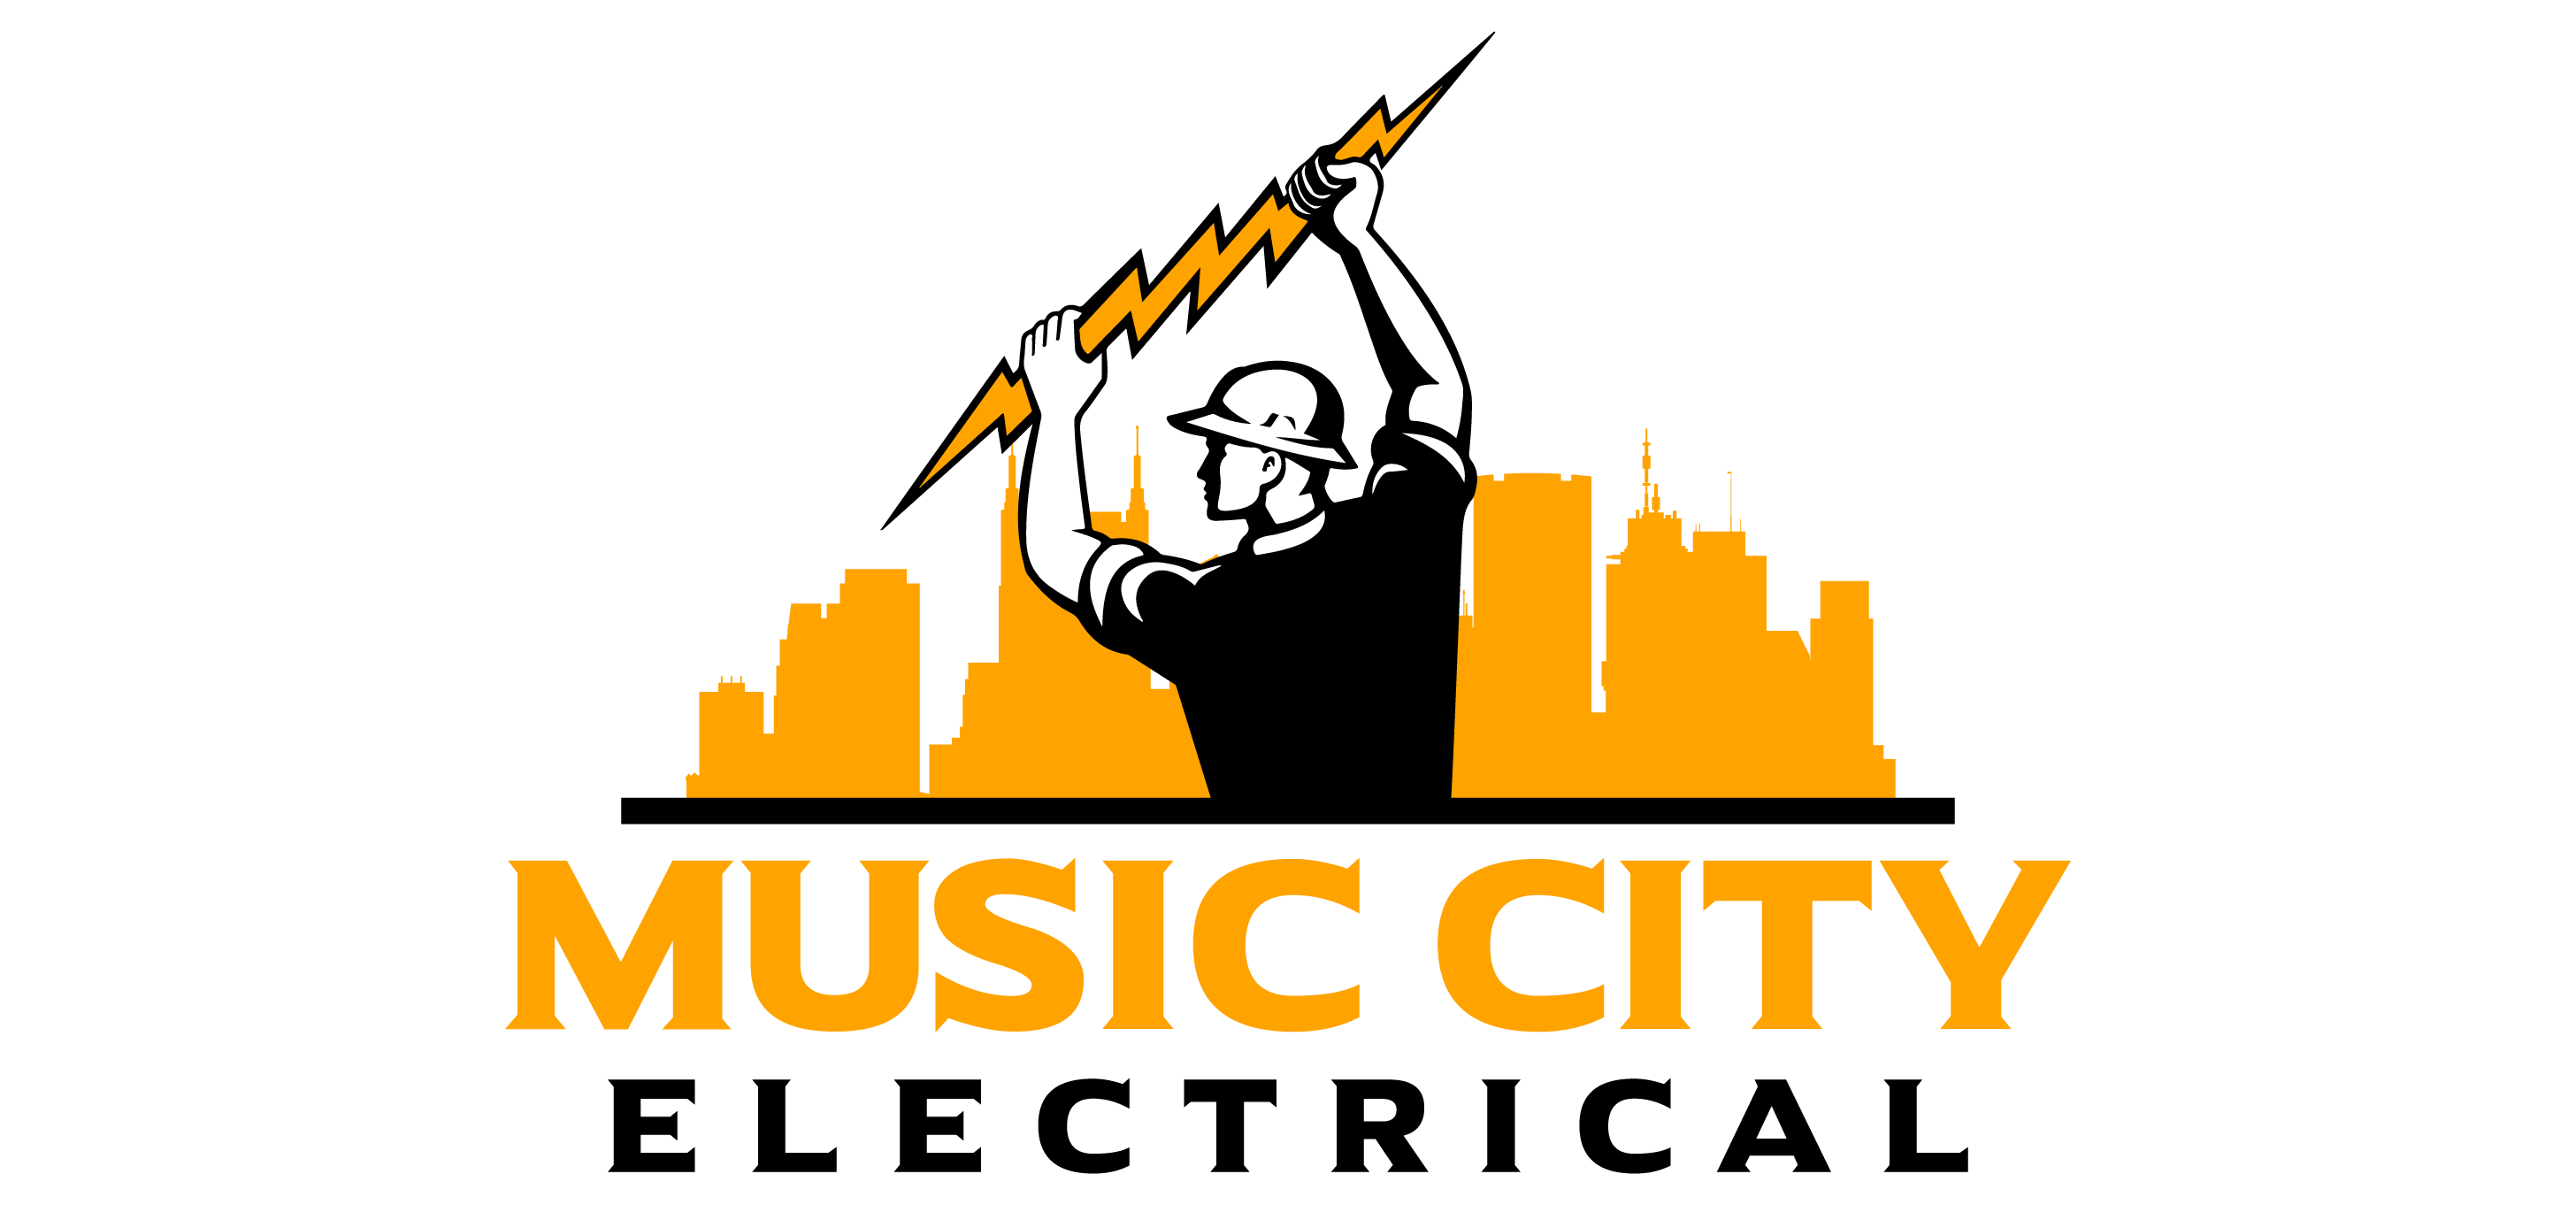 Music-City-Electrical-01